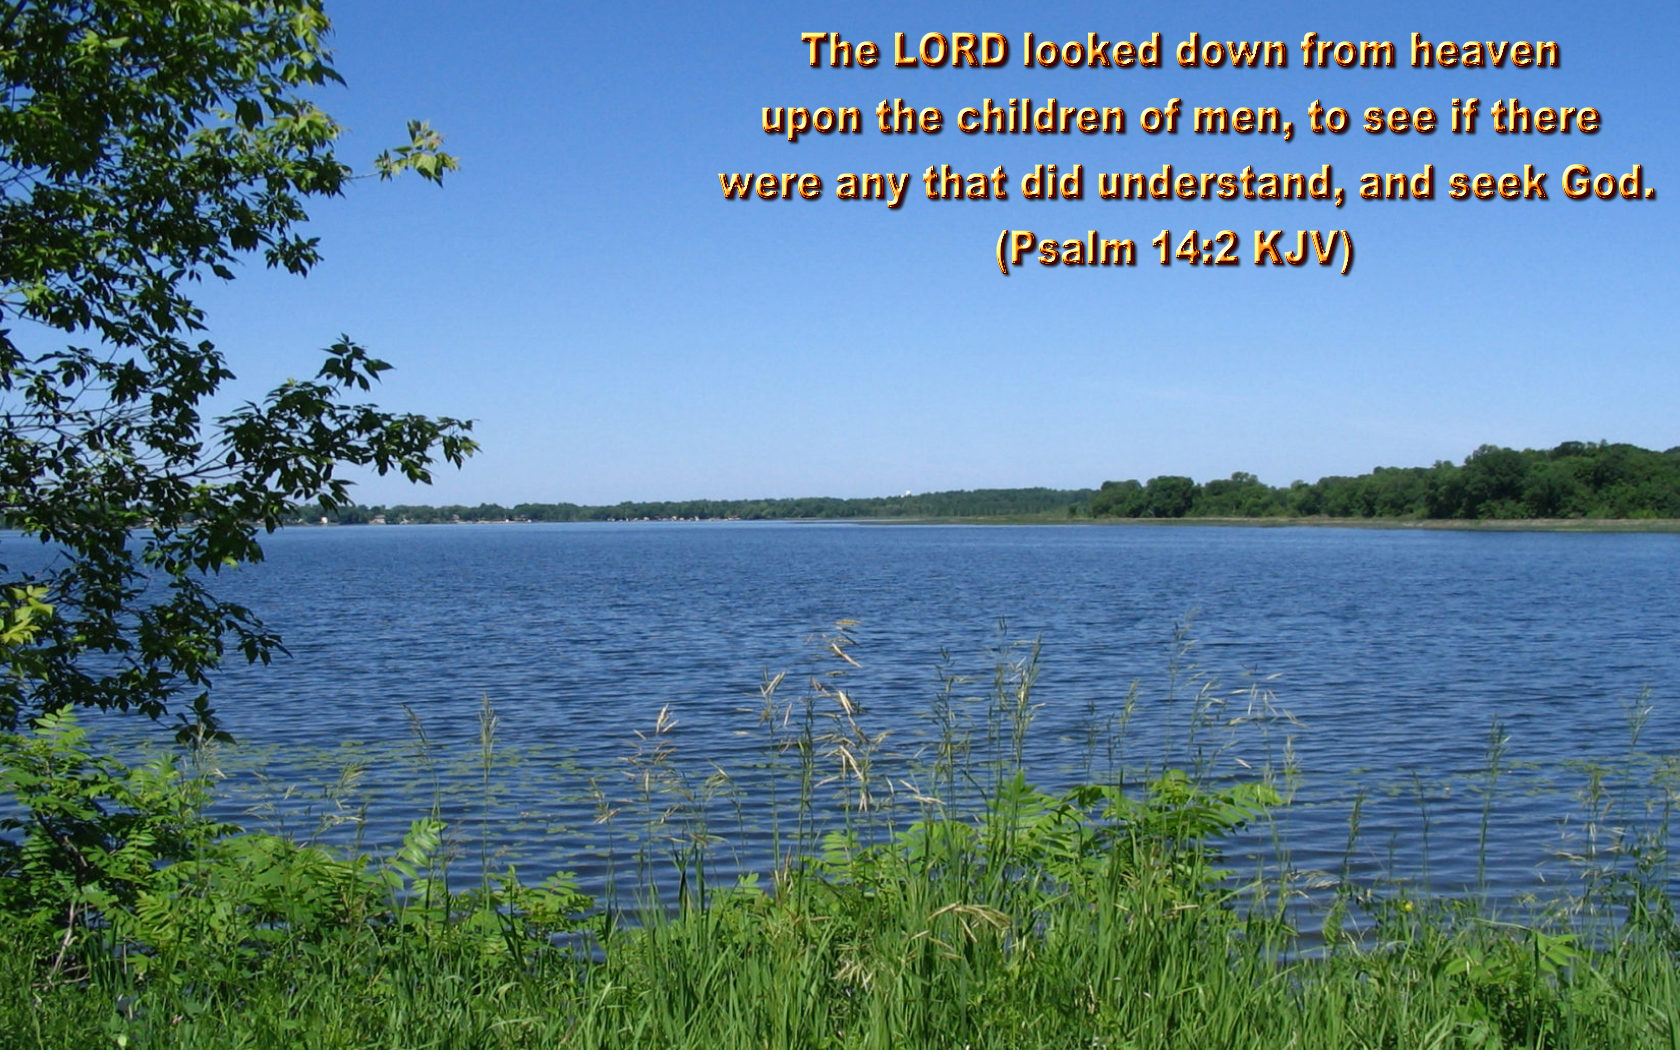 Green lakeshore at summer, Christian Wallpaper With Bible Verses free image download